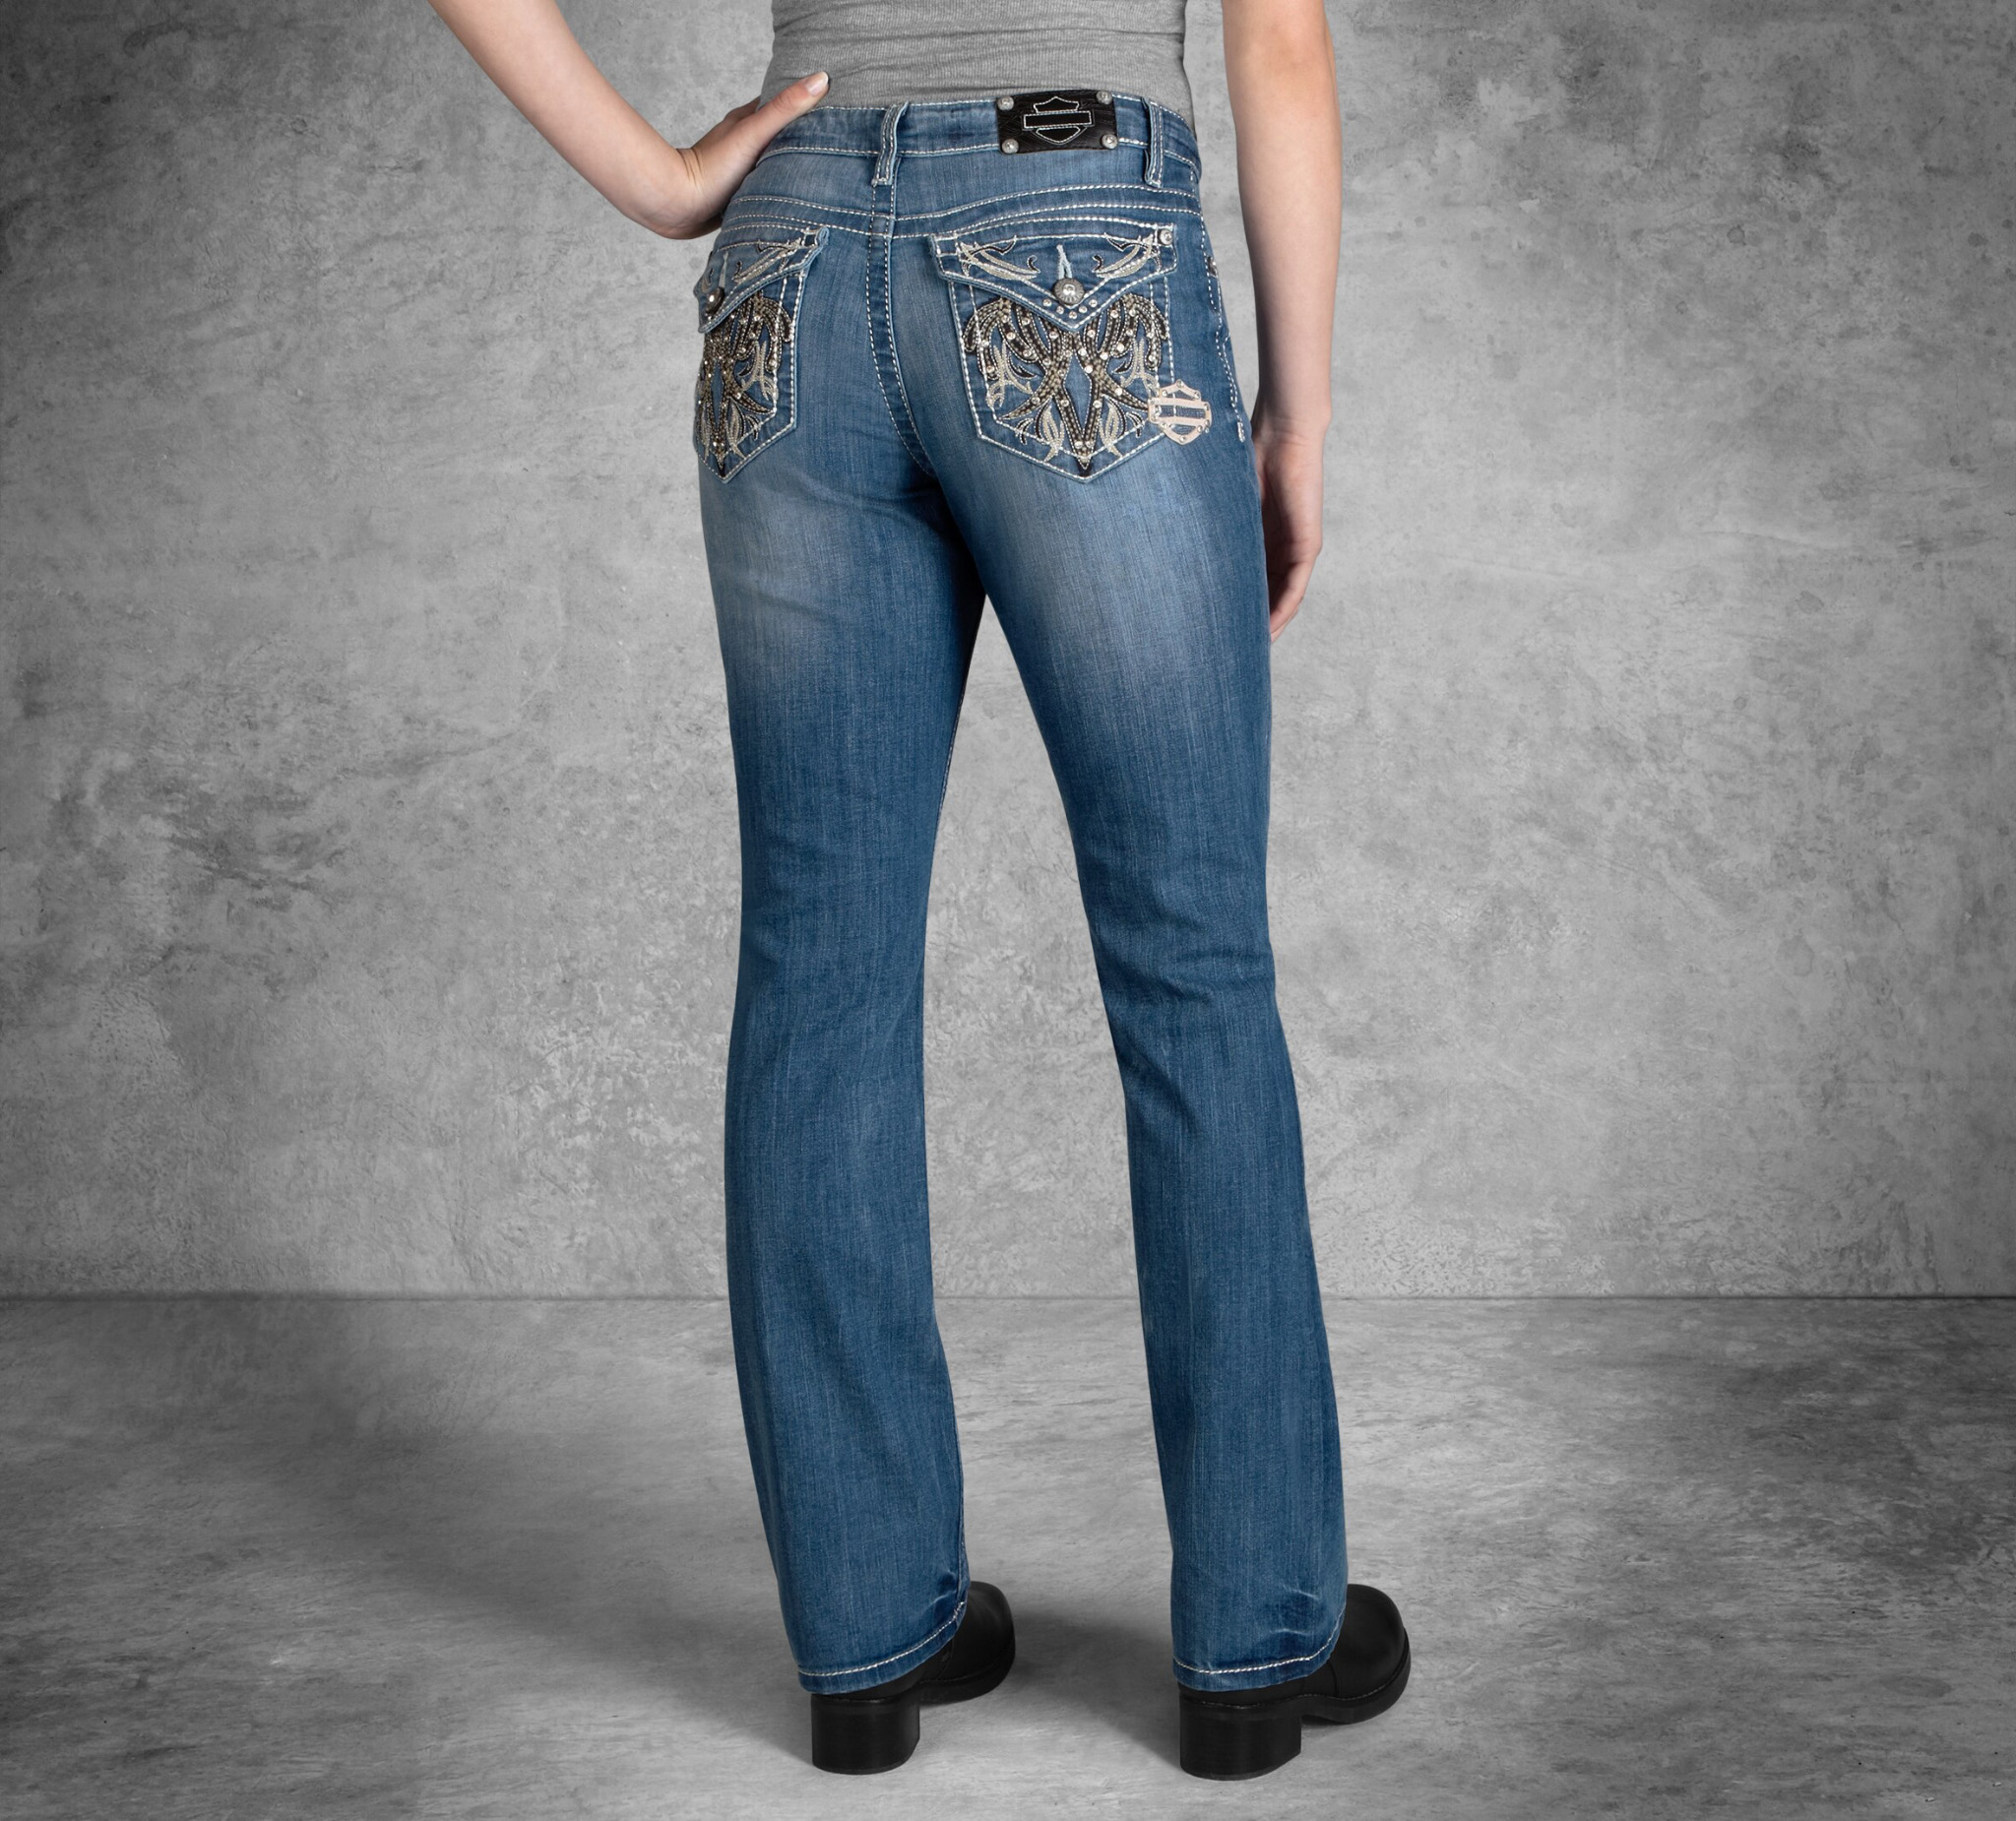 harley davidson womens jeans with bling